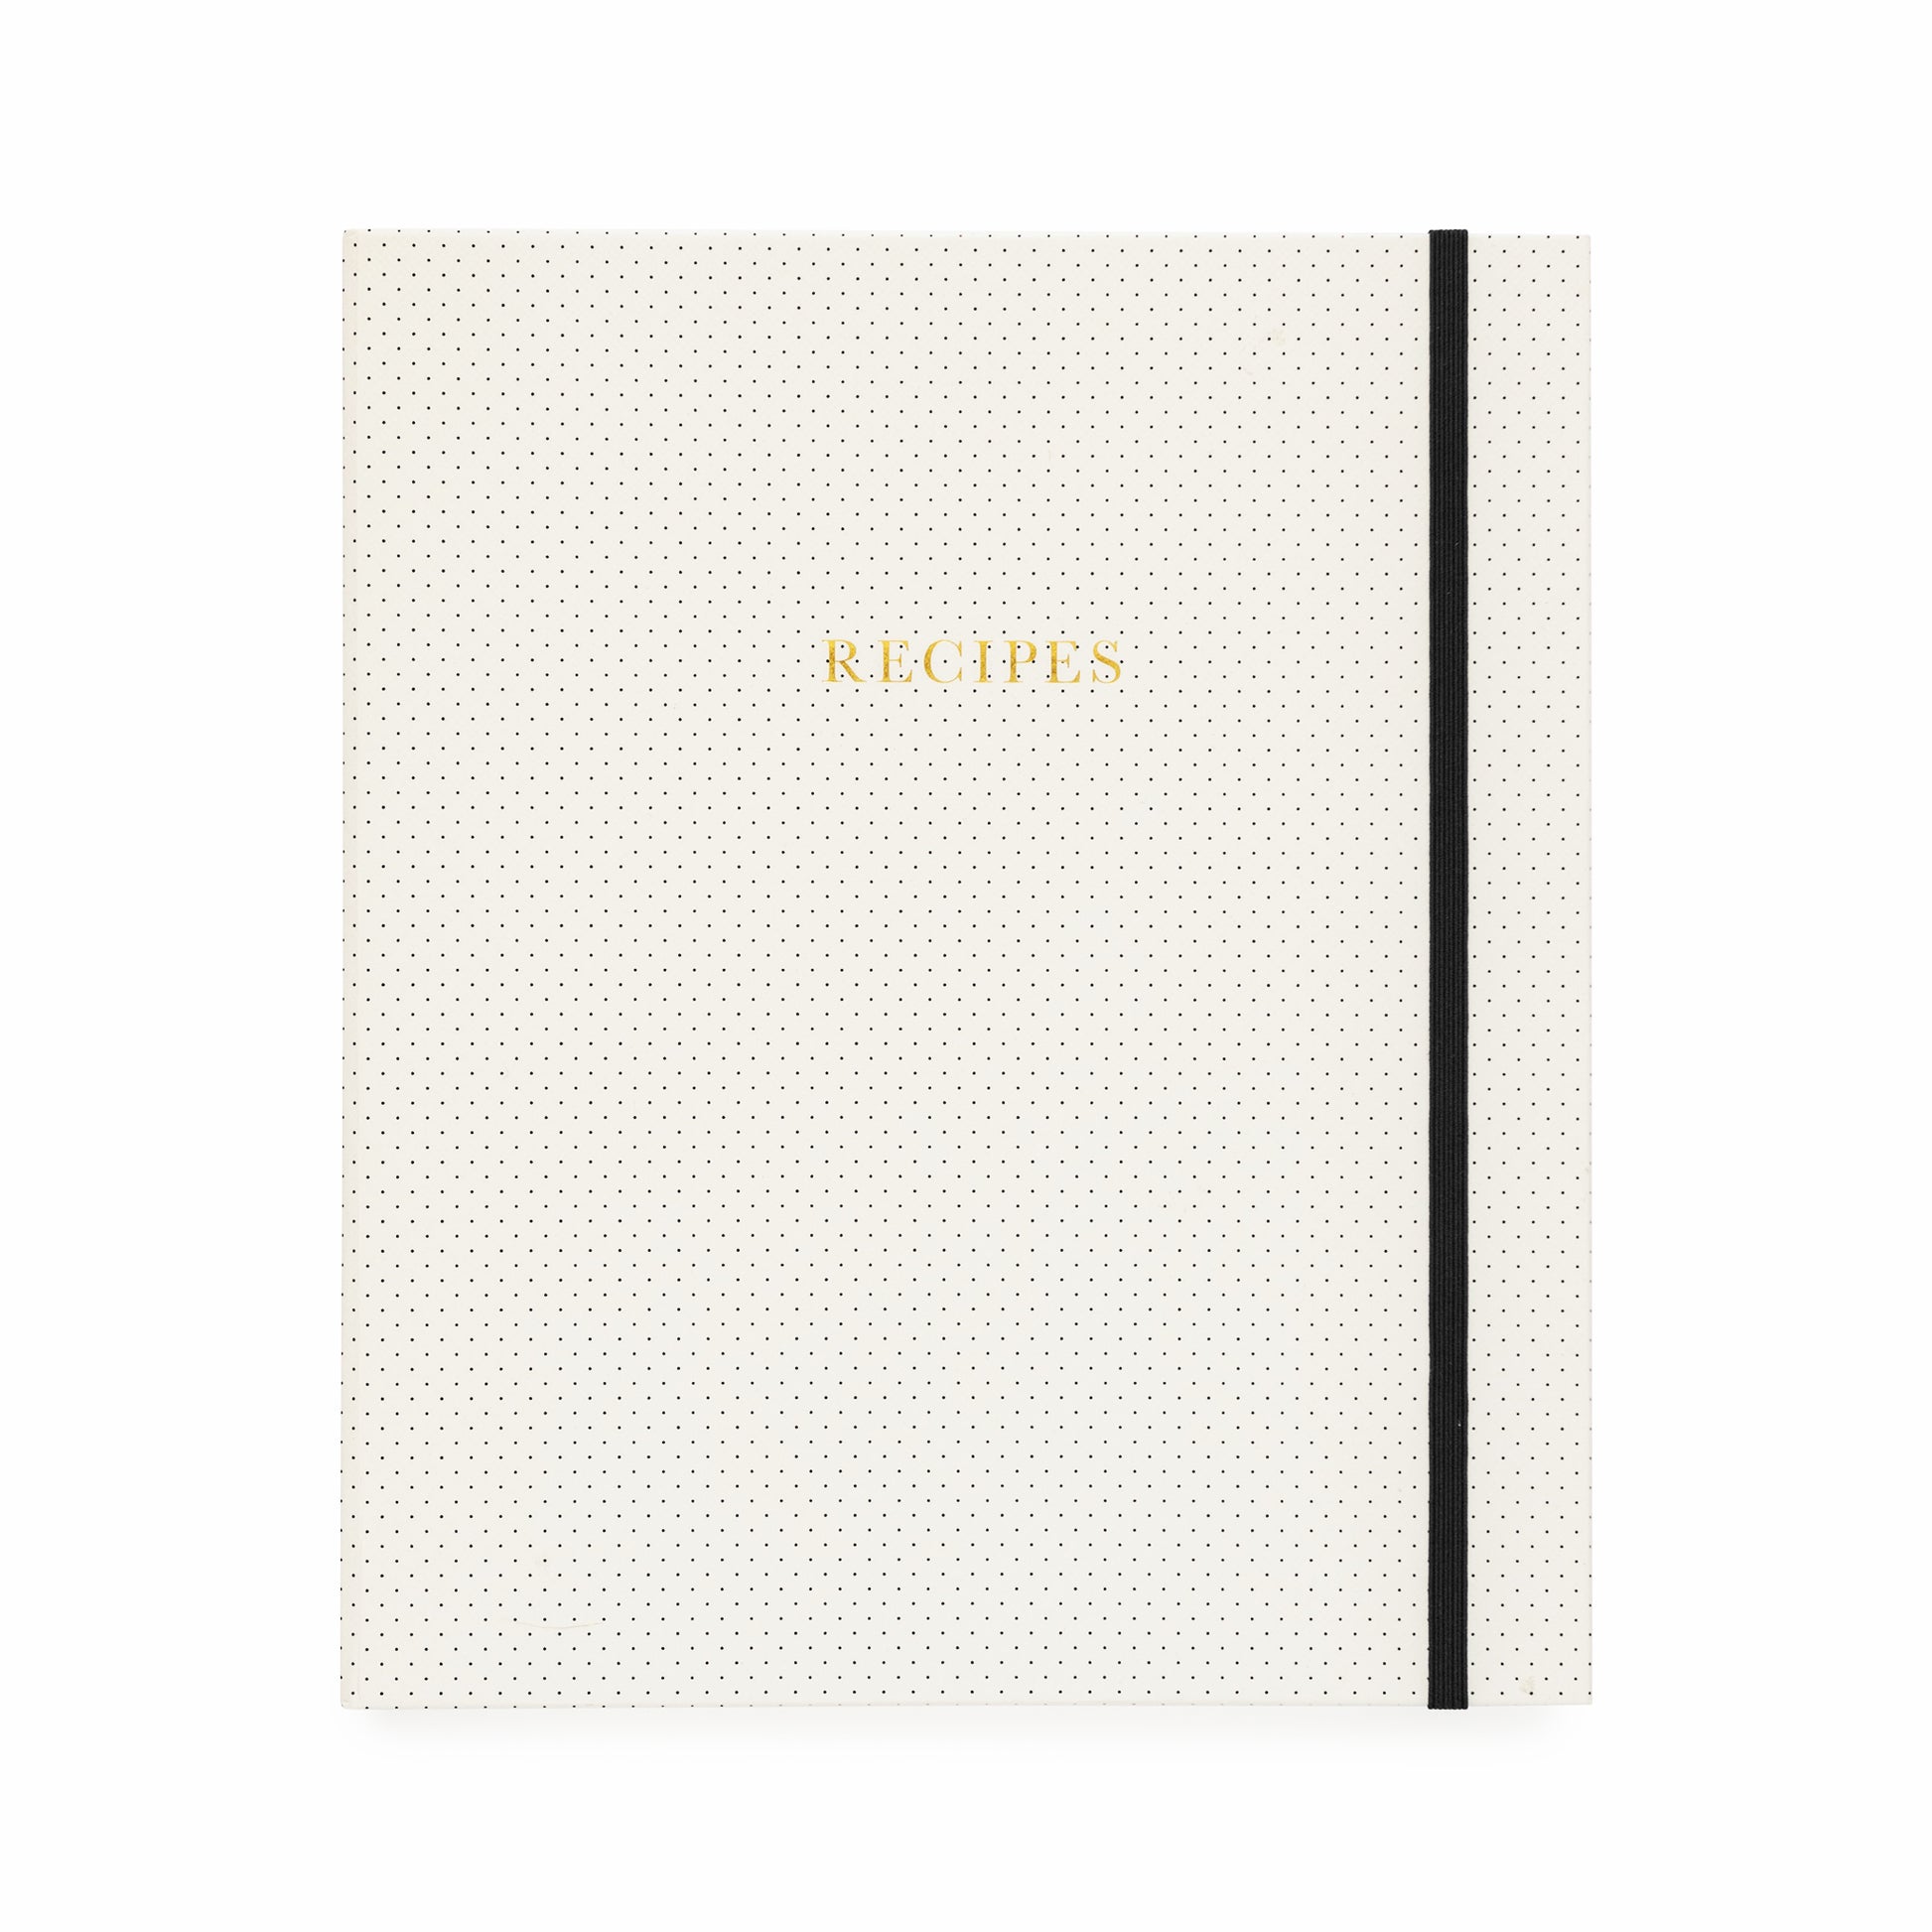 Blank Recipe Book To Write In Blank Cooking Book Recipe Journal 100 Recipe  Journal and Organizer (Paperback)